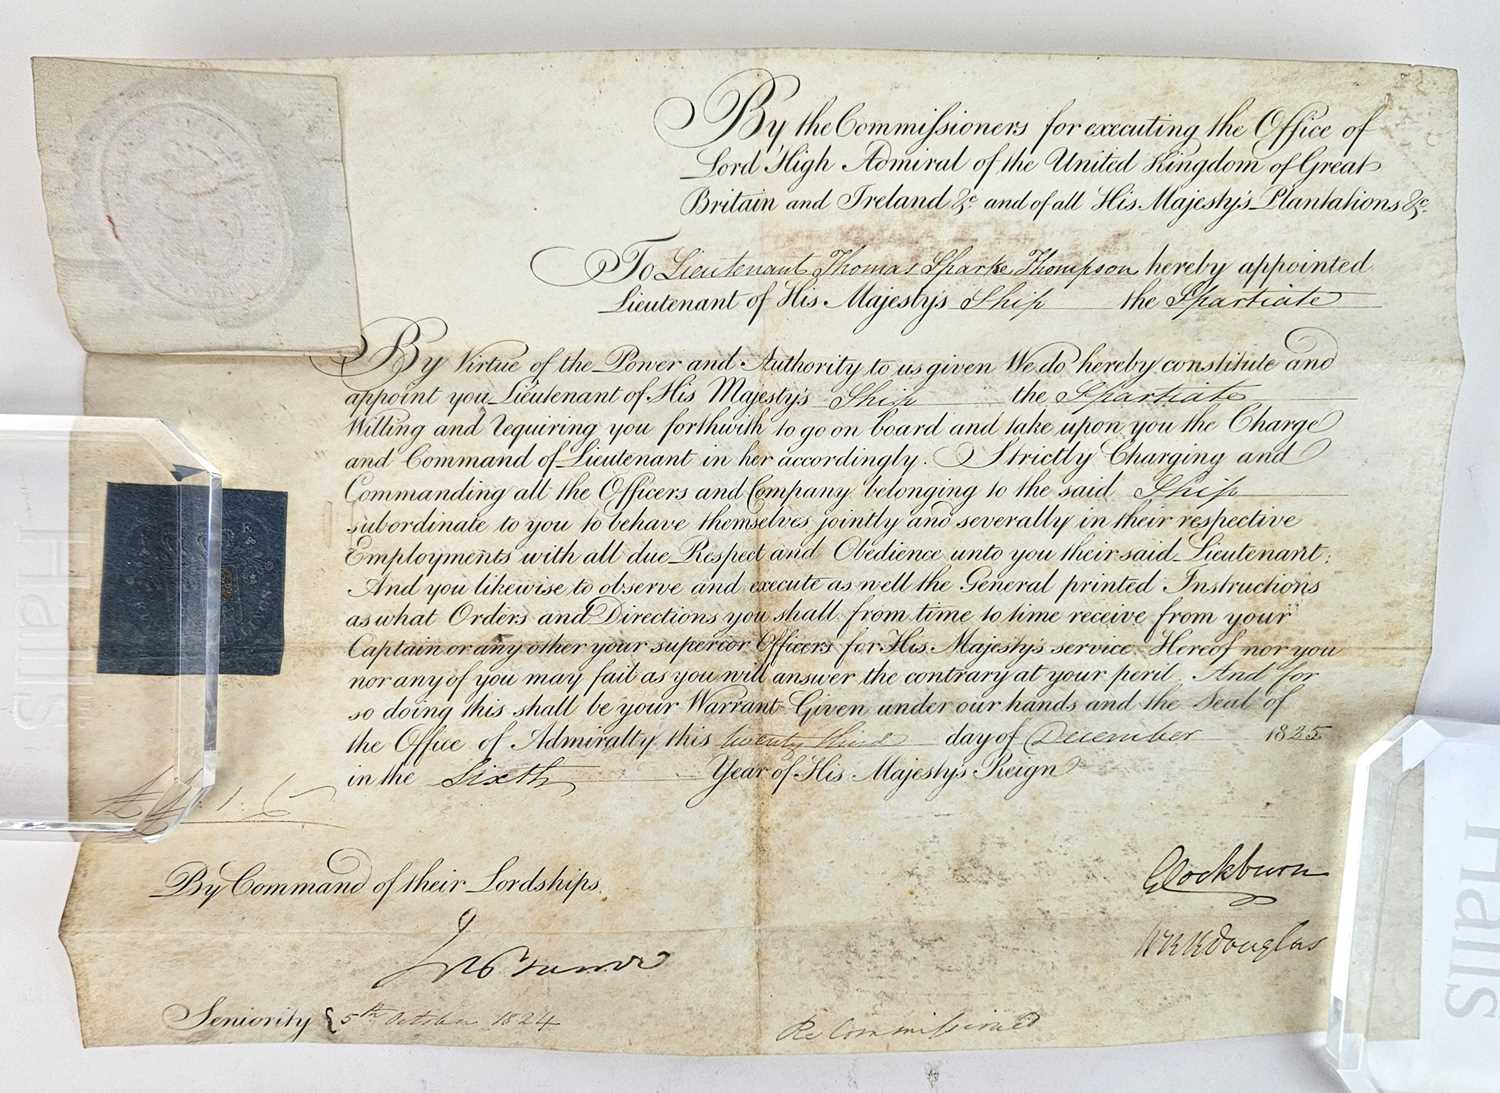 Royal Navy appointment - Lt. Thomas Sparke Thompson to HMS Spartiate, 23rd December 1825.